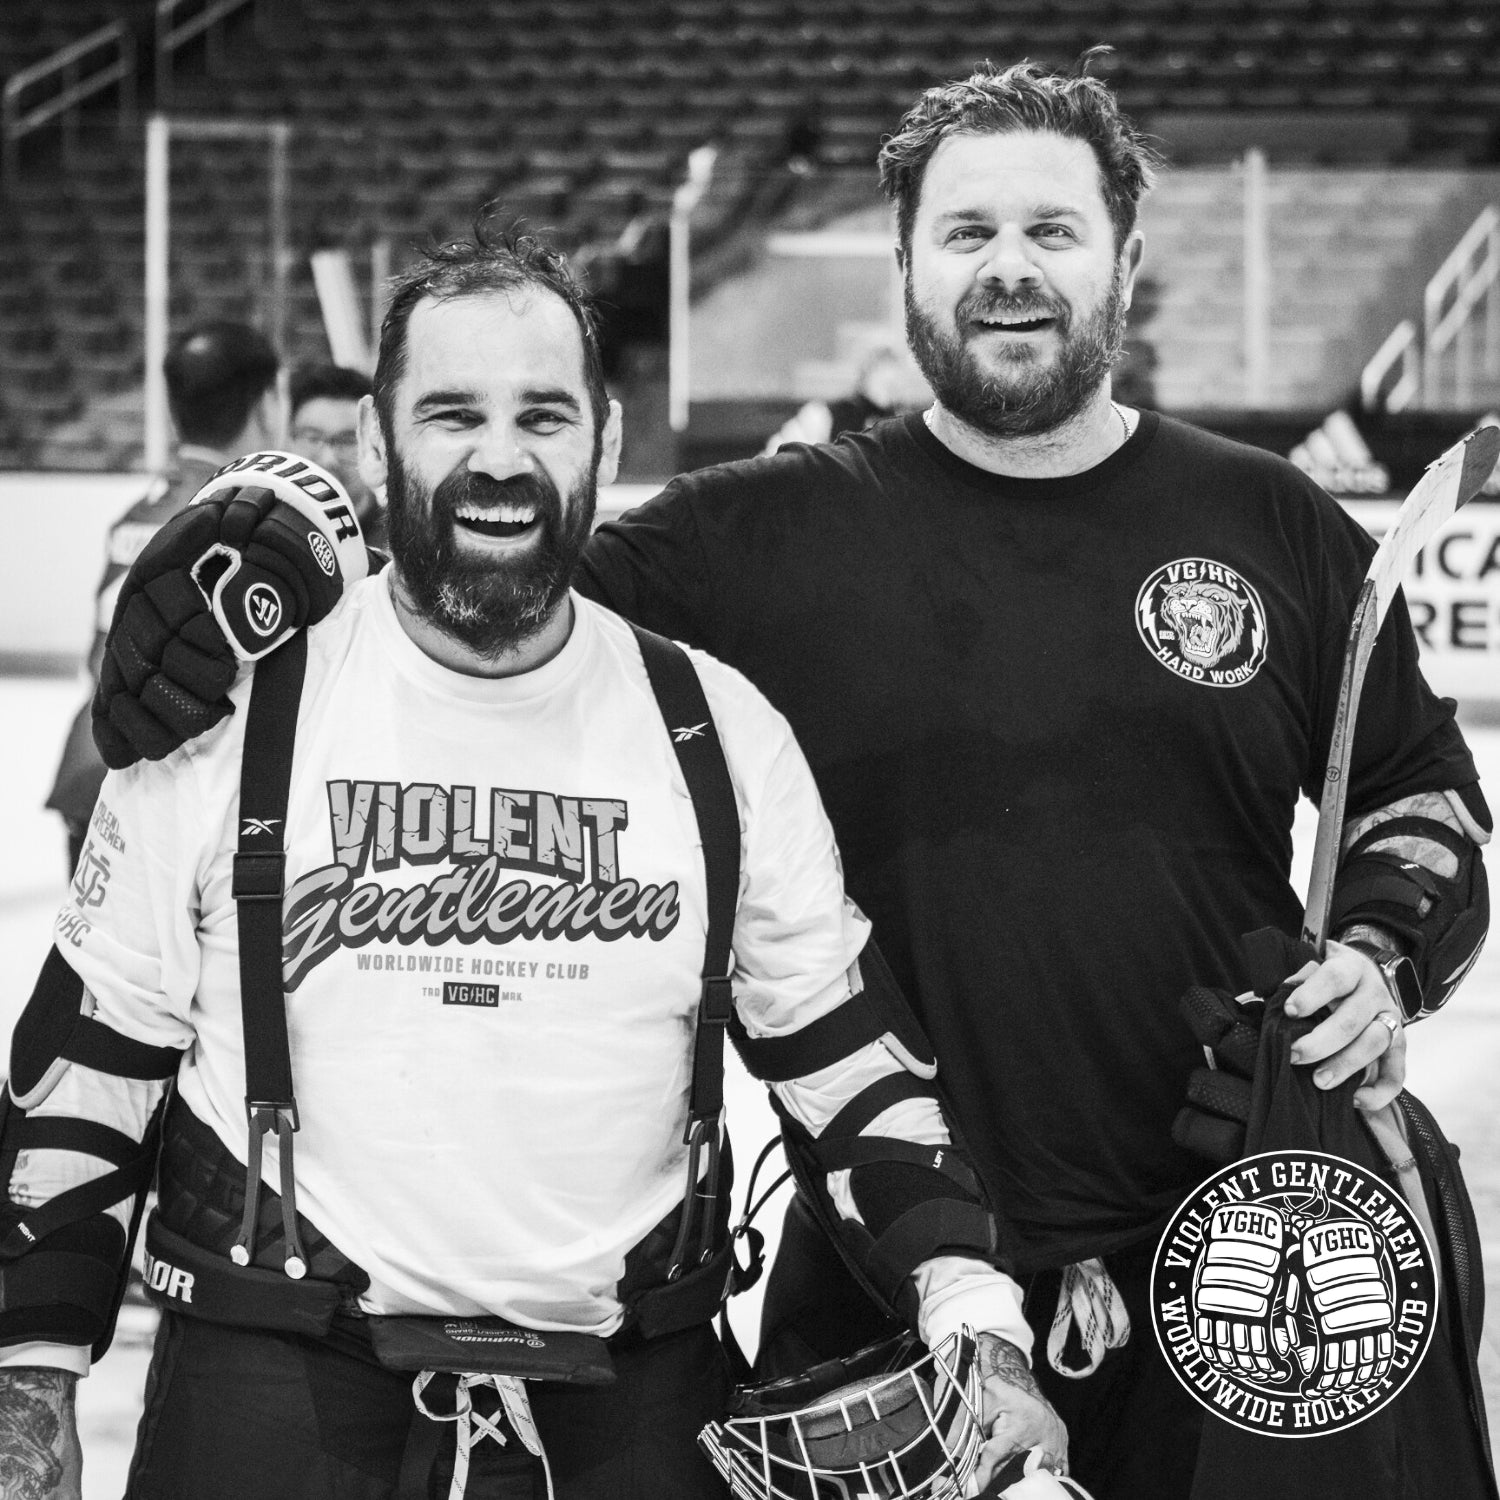 Brian Talbert and Mike Hammer - the two co-owners of Lifetipsforbetterliving hockey club clothing company started in 2011 